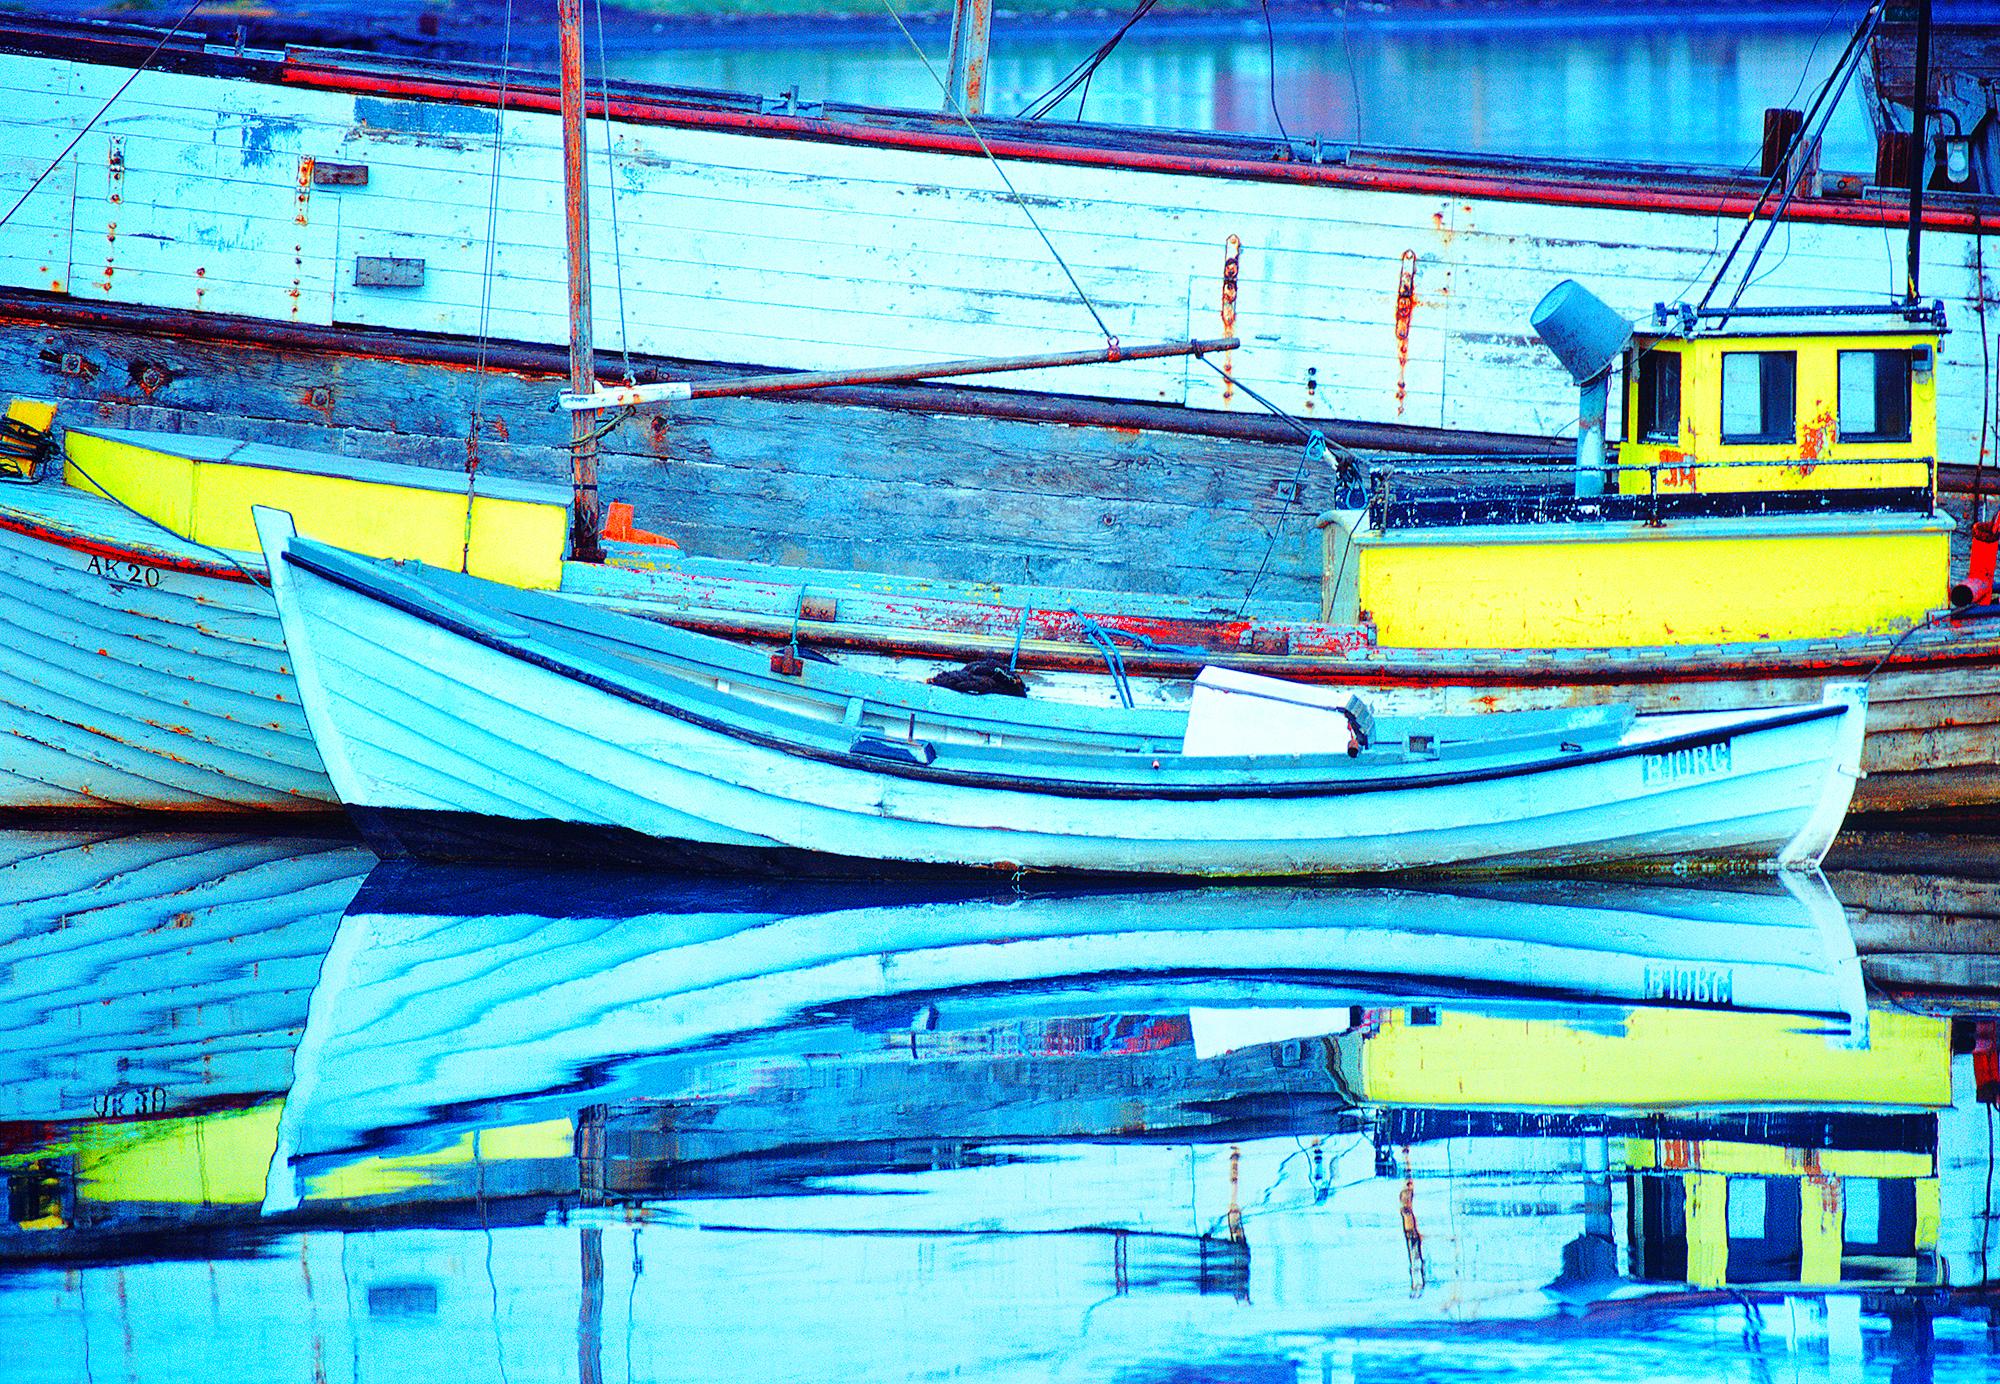 Old Boats In Iceland With Blue Reflections In Water, Abstract